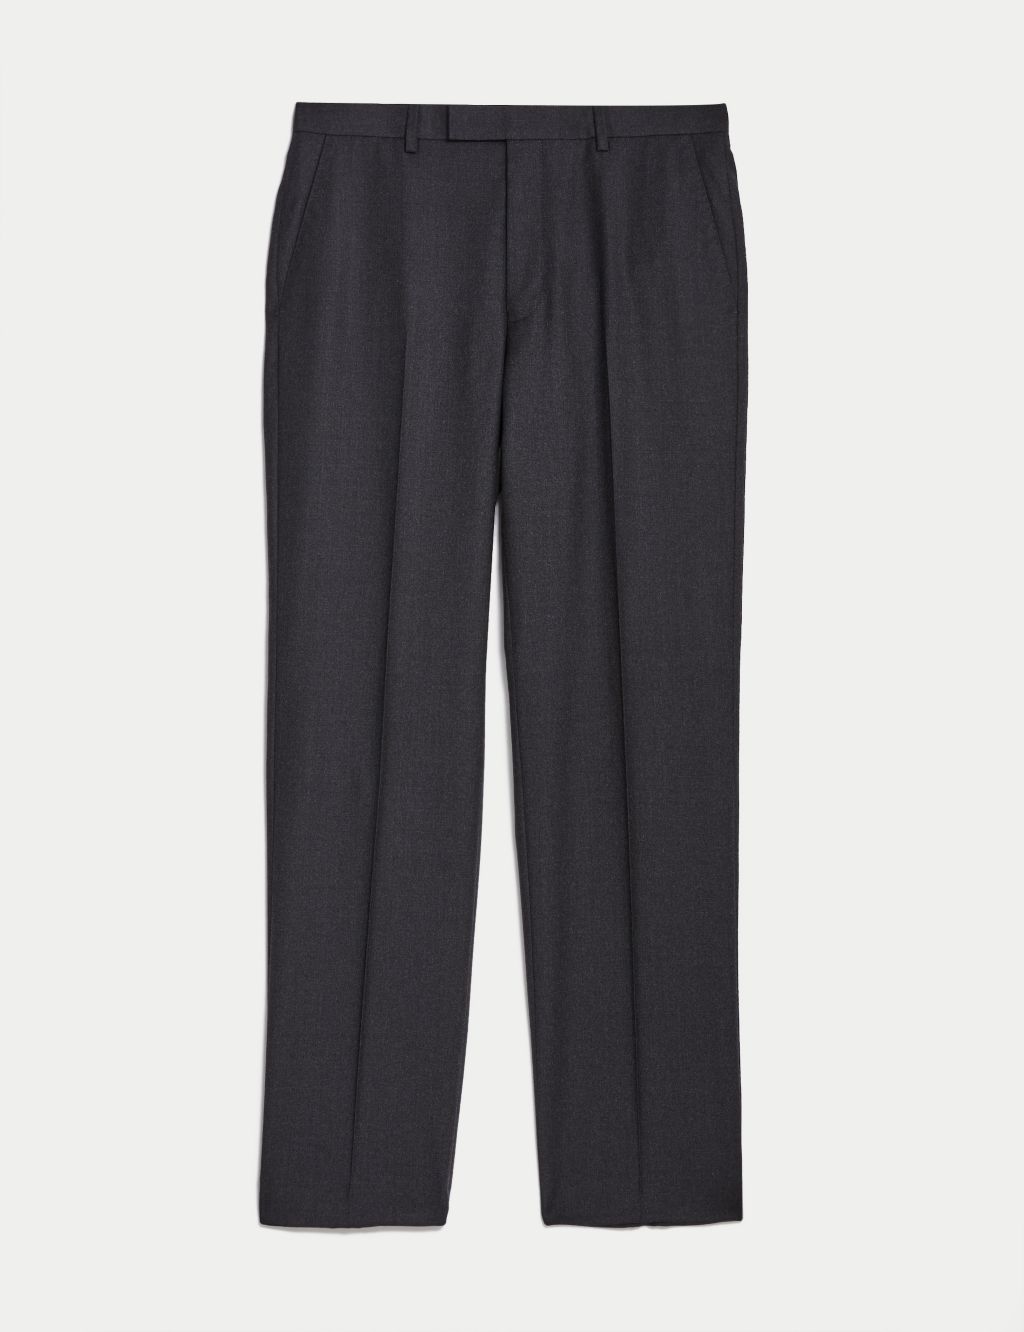 Slim Fit Pure Wool Suit Trousers image 2